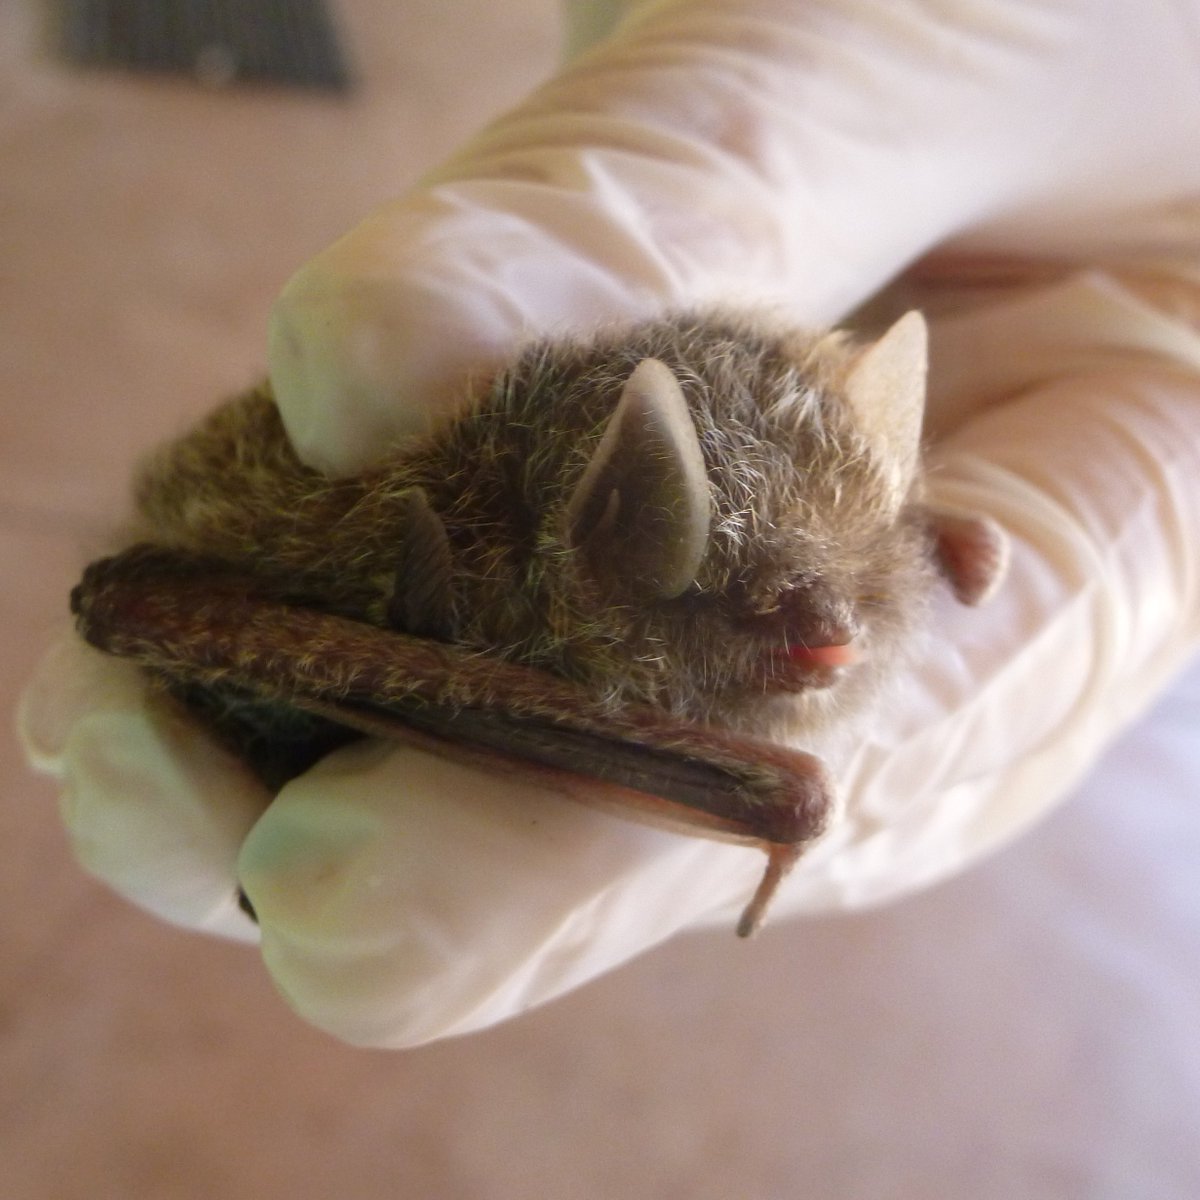 In honor of #BatAppreciationMonth , I present to you the lesser woolly #bat (Kerivoula lanosa) from Eswatini, one of the cutest #bats I've ever had the privilege of catching. Complete with #blep #BatMonth #fluffy #smol #cute #skypuppy